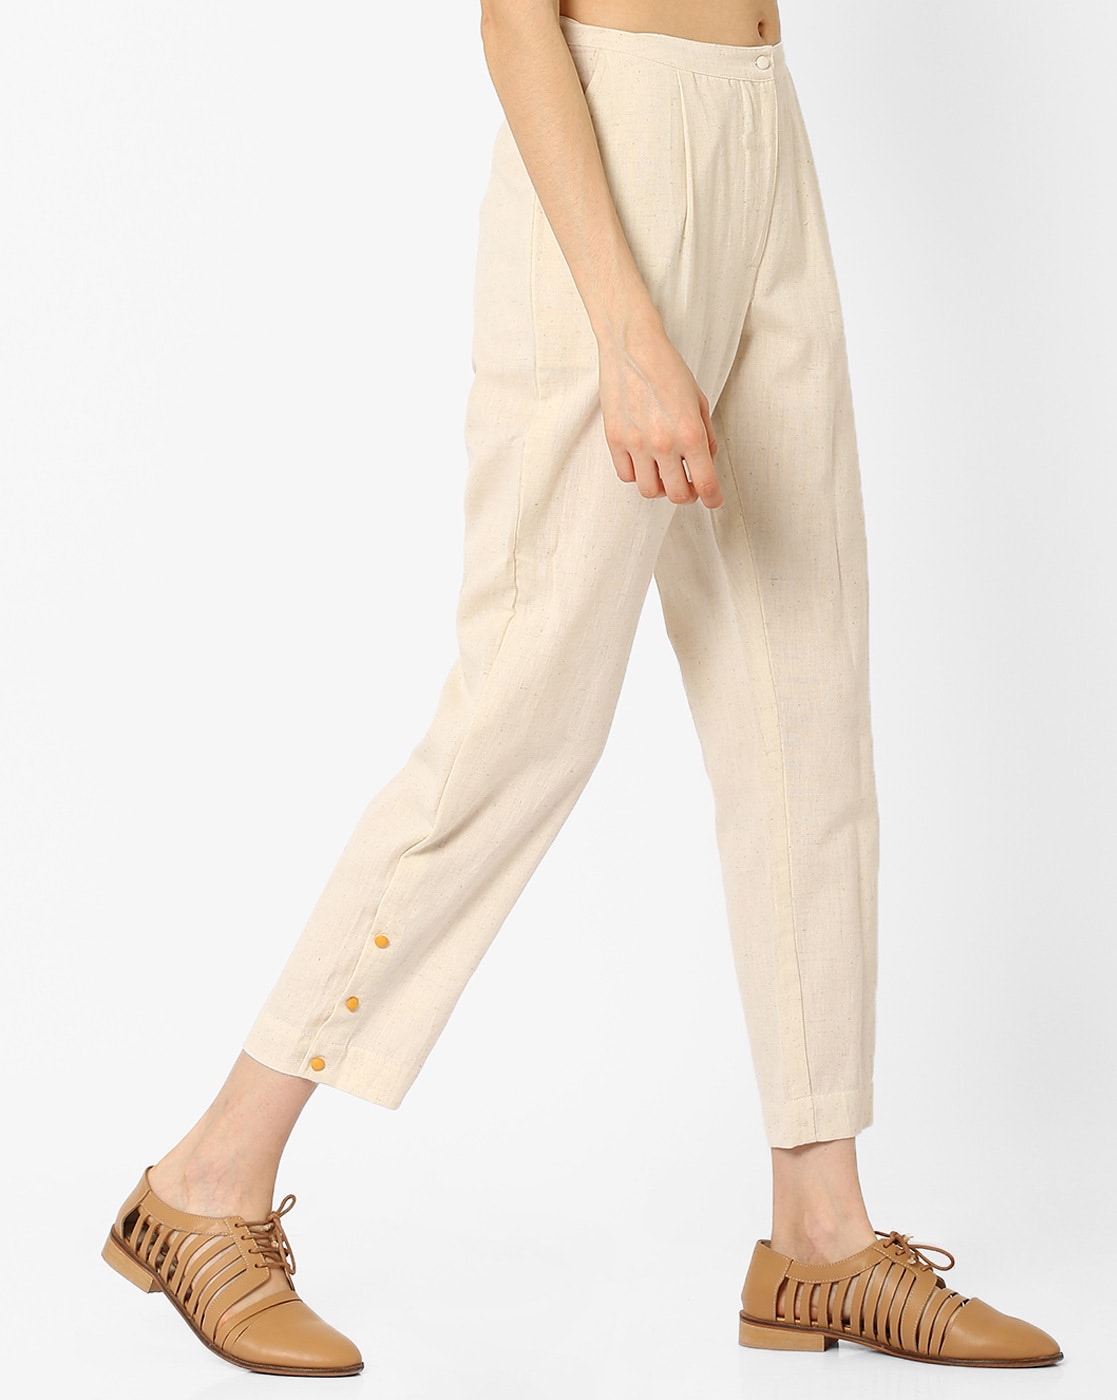 Buy OffWhite Cotton Solid Cigarette Pants Online in India